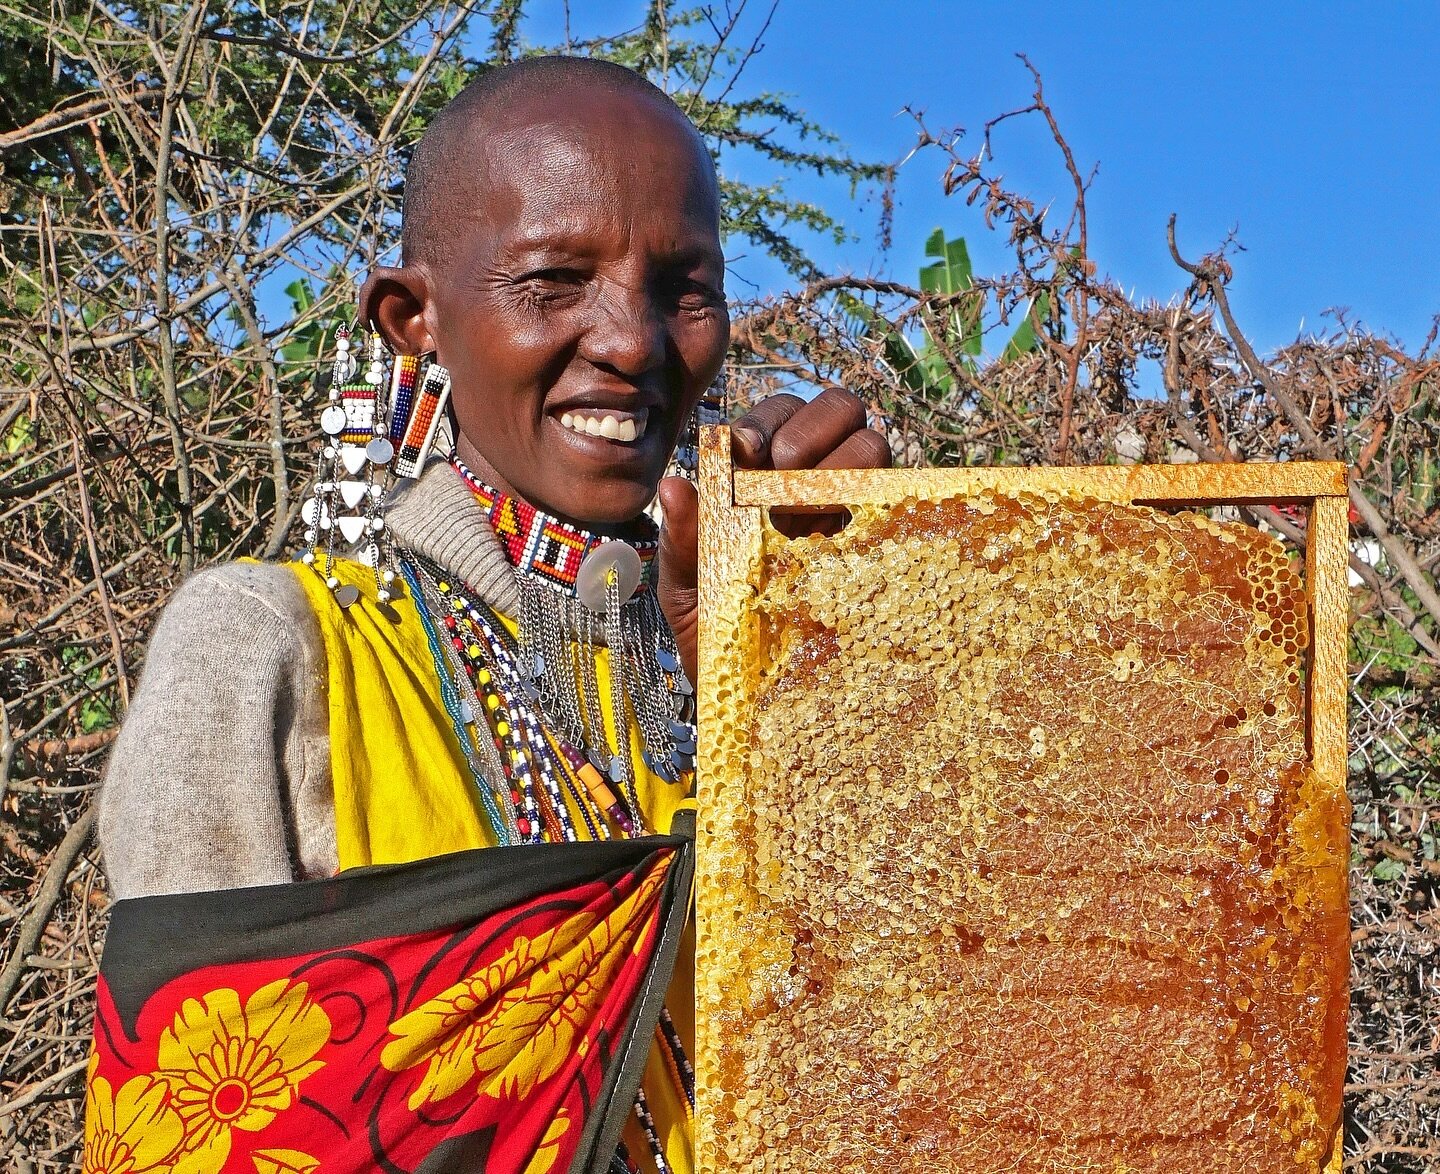 As fresh as it gets! 👏 We pride ourselves in bringing you the best quality honey, from the Maasai women beekeepers of Ololosokwan Village. 

You can support these wonderful beekeepers by buying honey in Tanzania:
www.TanzaniaBeekeeping.com

Or in th